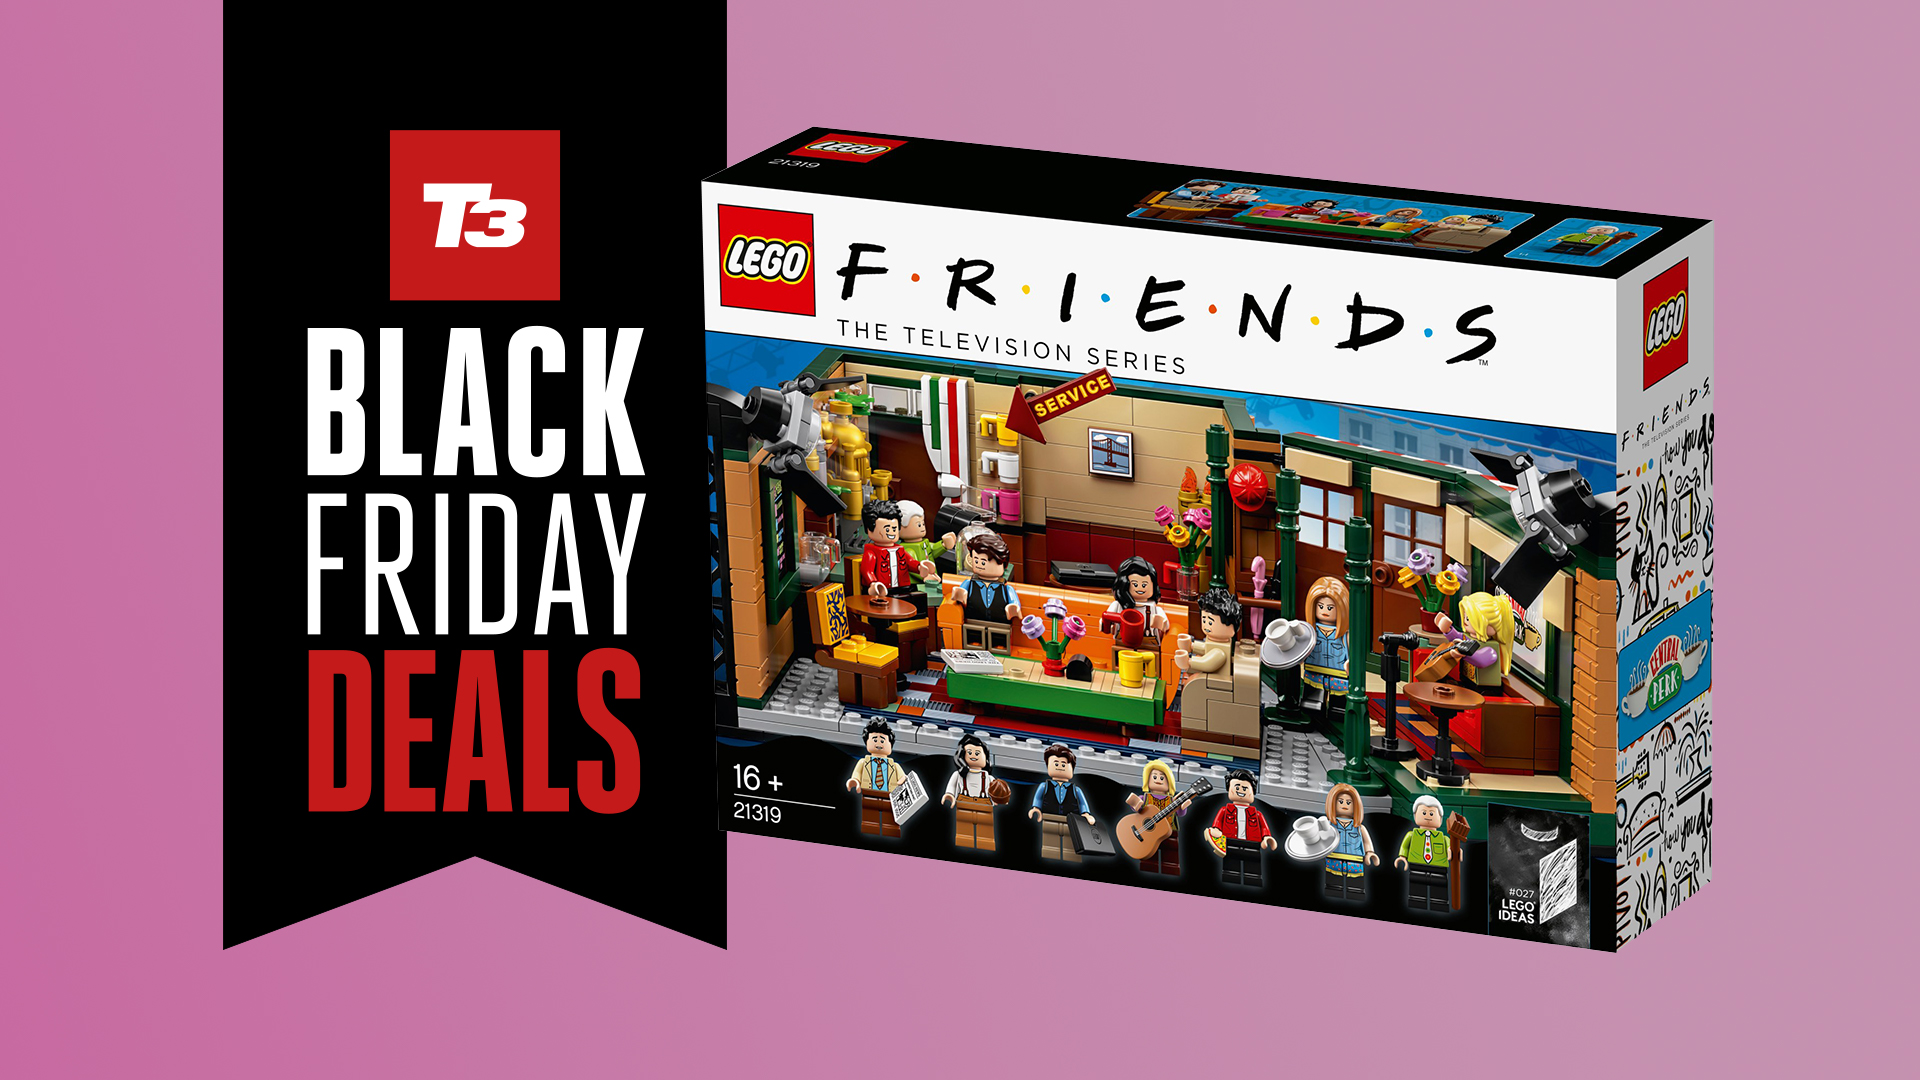 The Lego Friends Central Perk set is now available to buy, and it's AMAZING